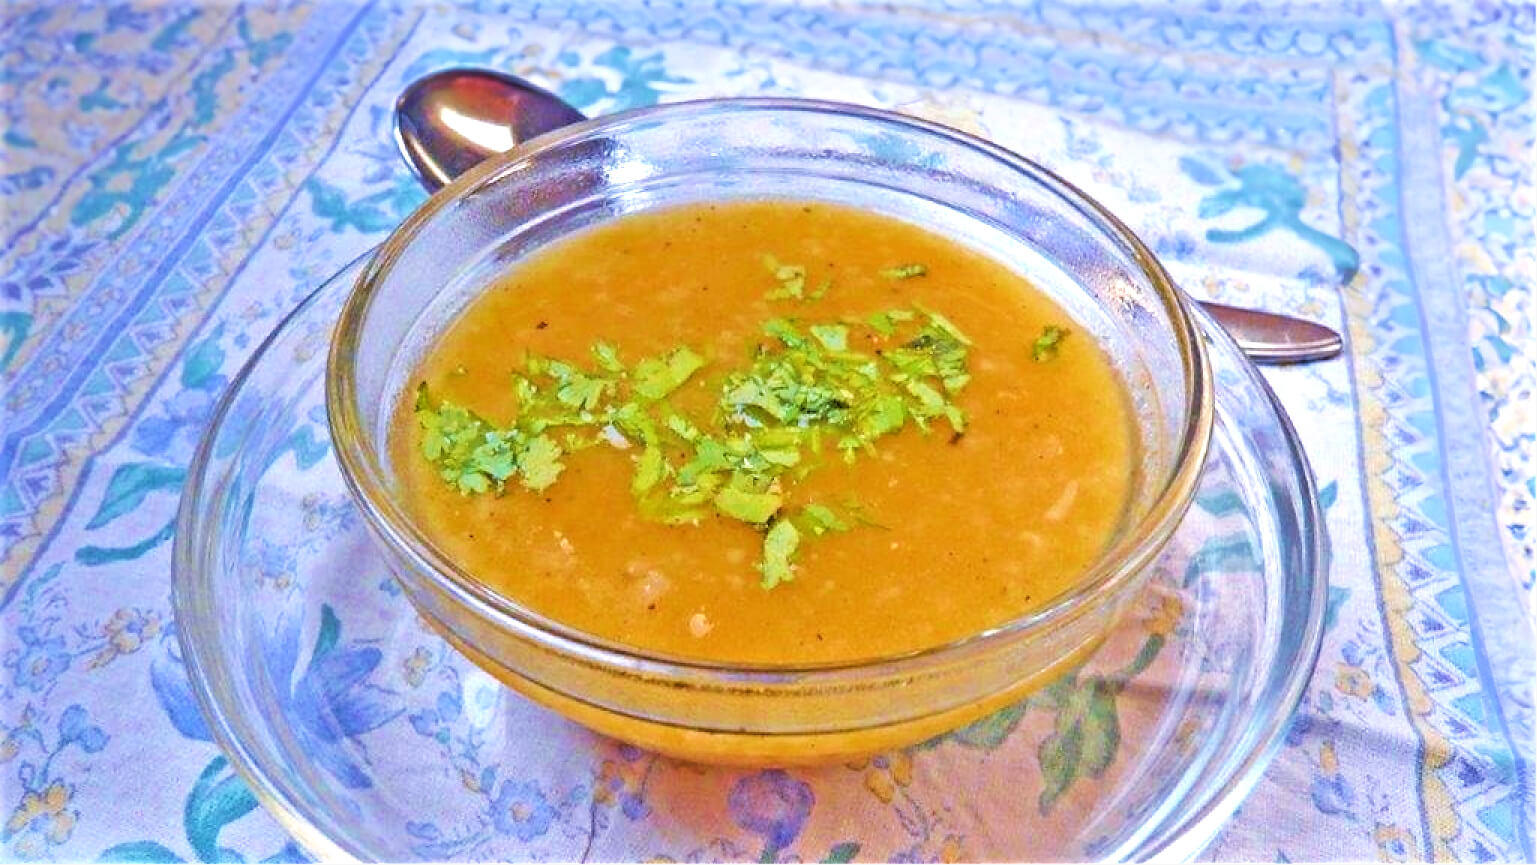 https://echo.santulan.in/wp-content/uploads/2023/06/1.-Use-this-image-Bhopla-Soup-Final-3.jpg